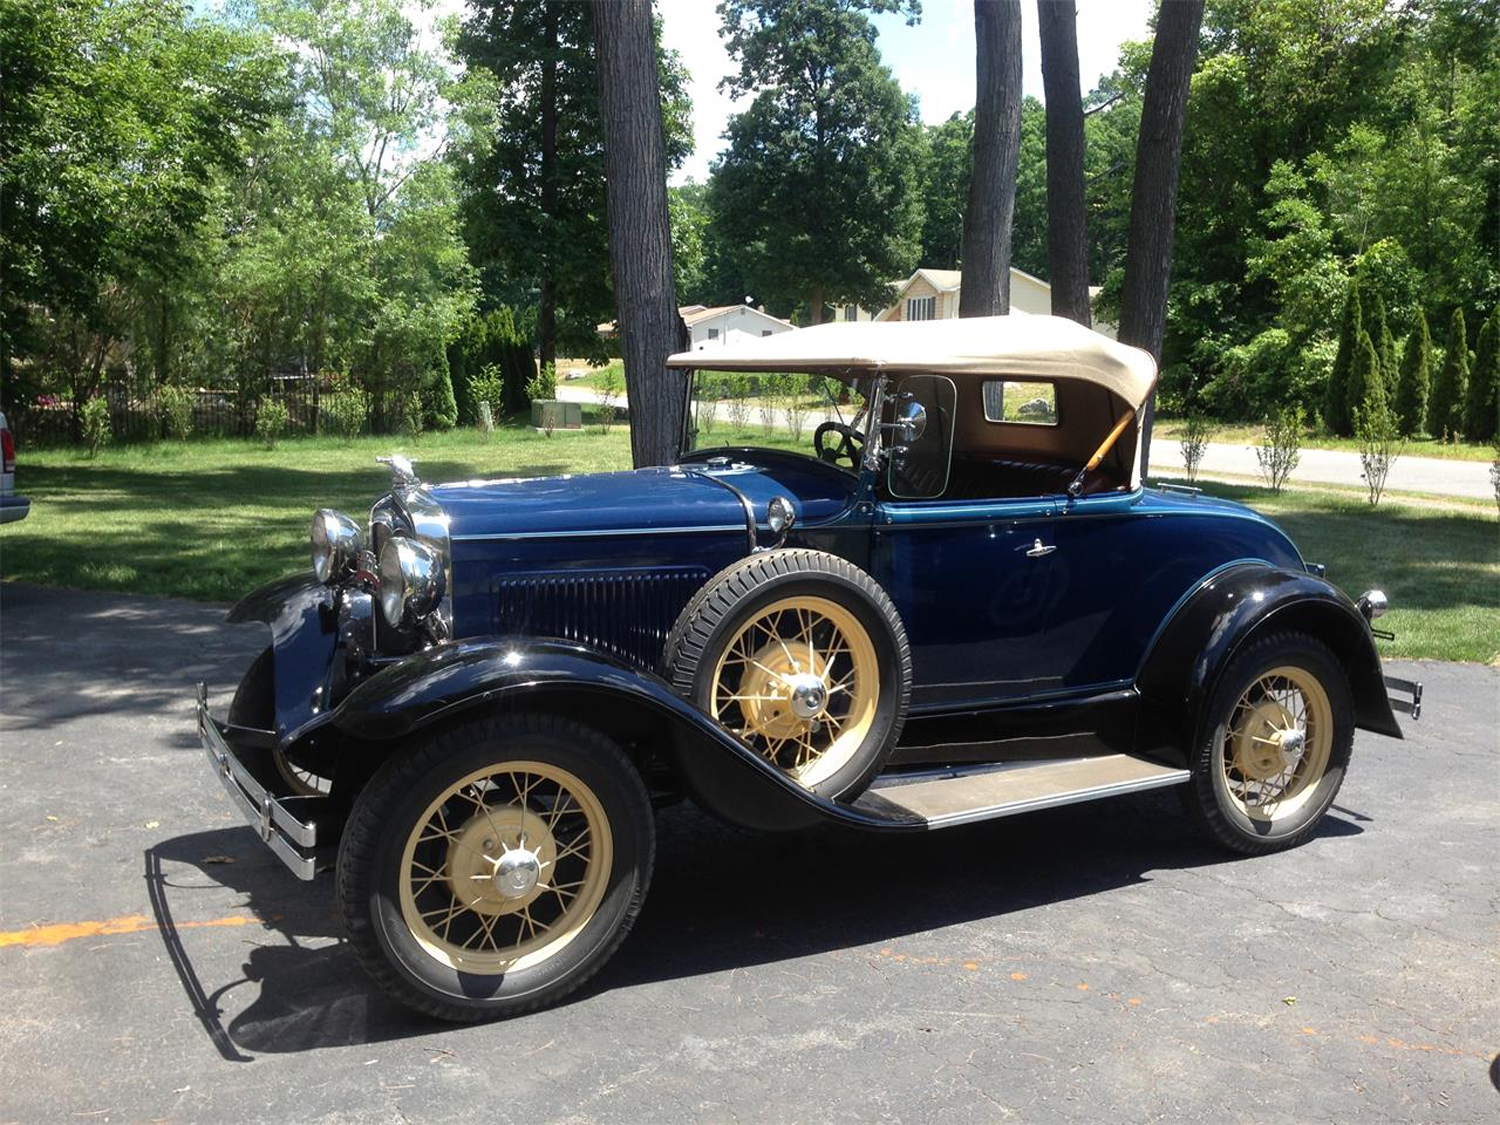 Fully Restored 1931 Ford Model A Has A Rumble Seat